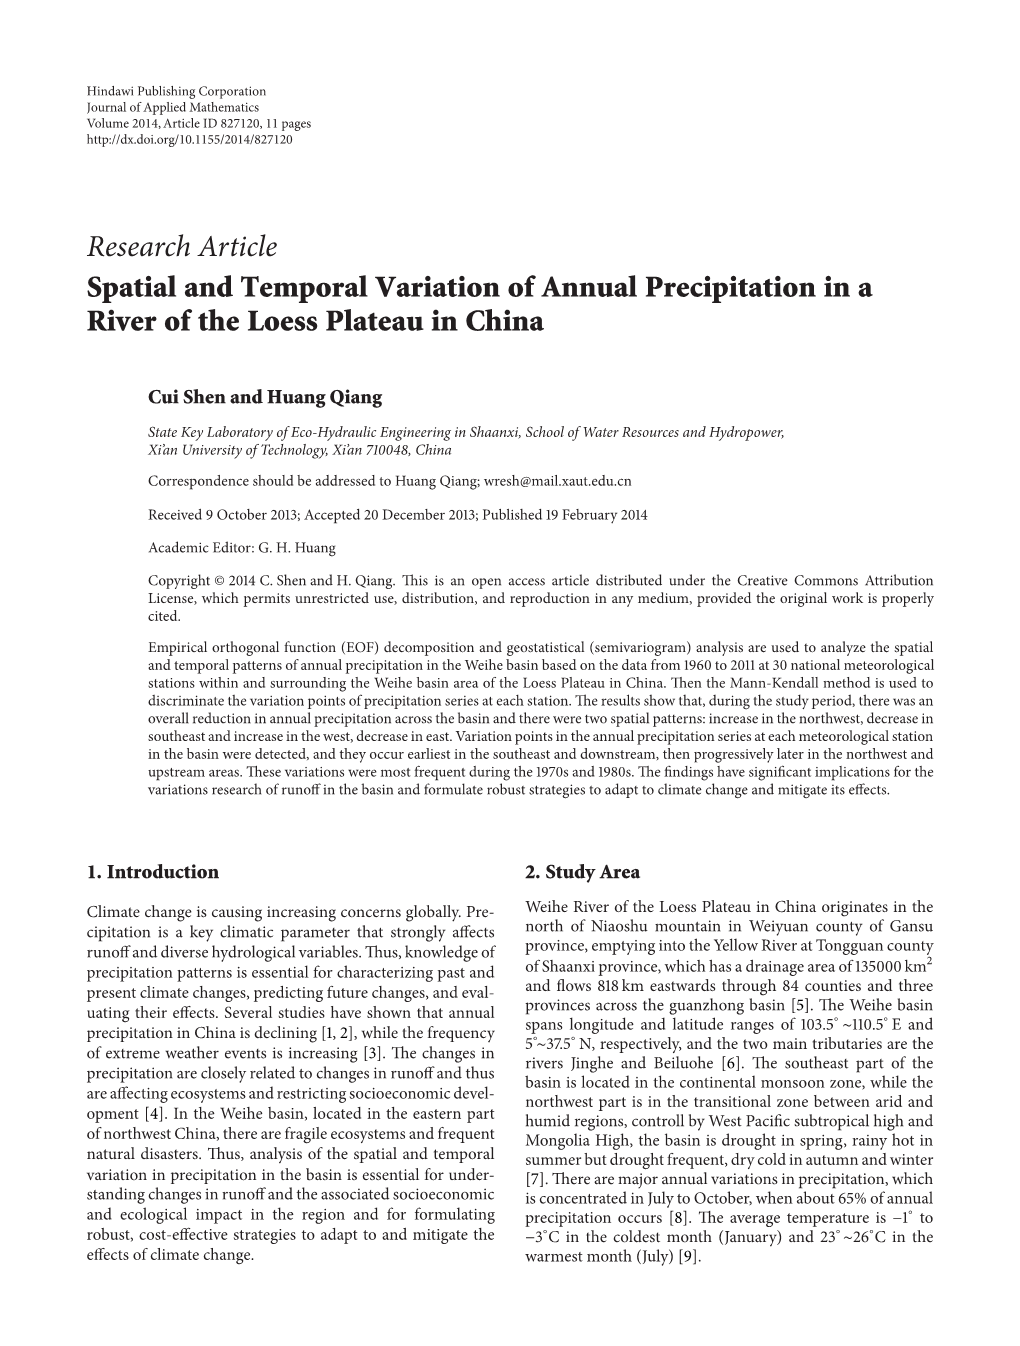 Spatial and Temporal Variation of Annual Precipitation in a River of the Loess Plateau in China